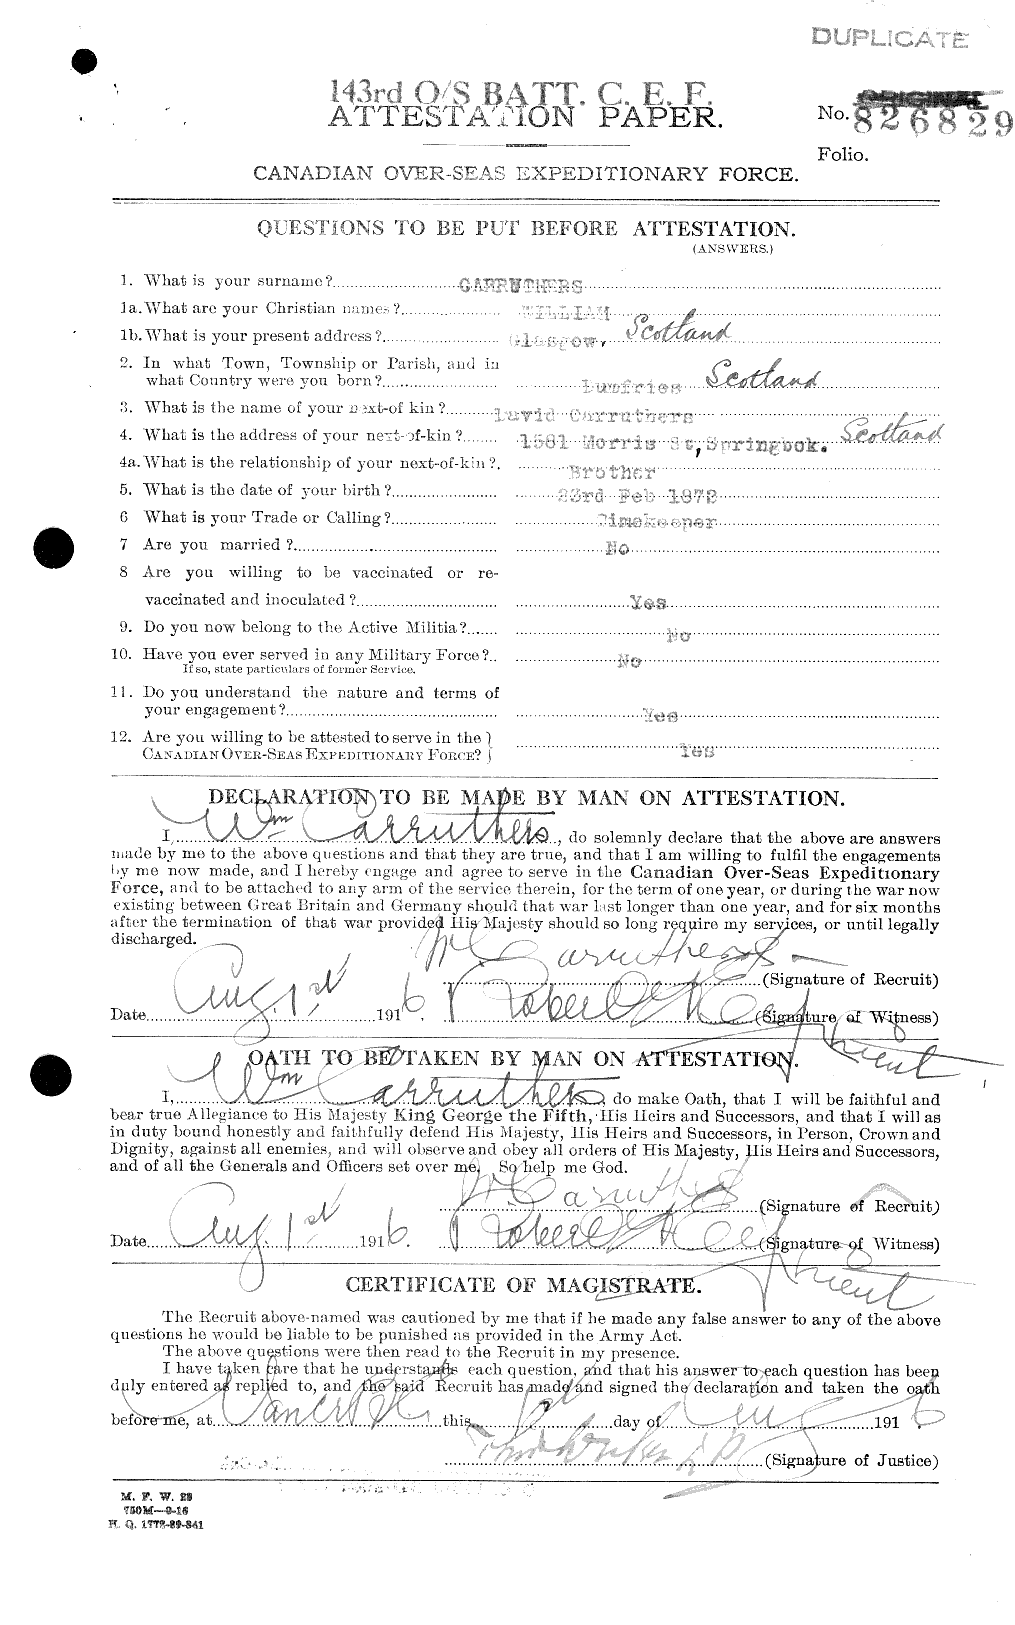 Personnel Records of the First World War - CEF 011451a